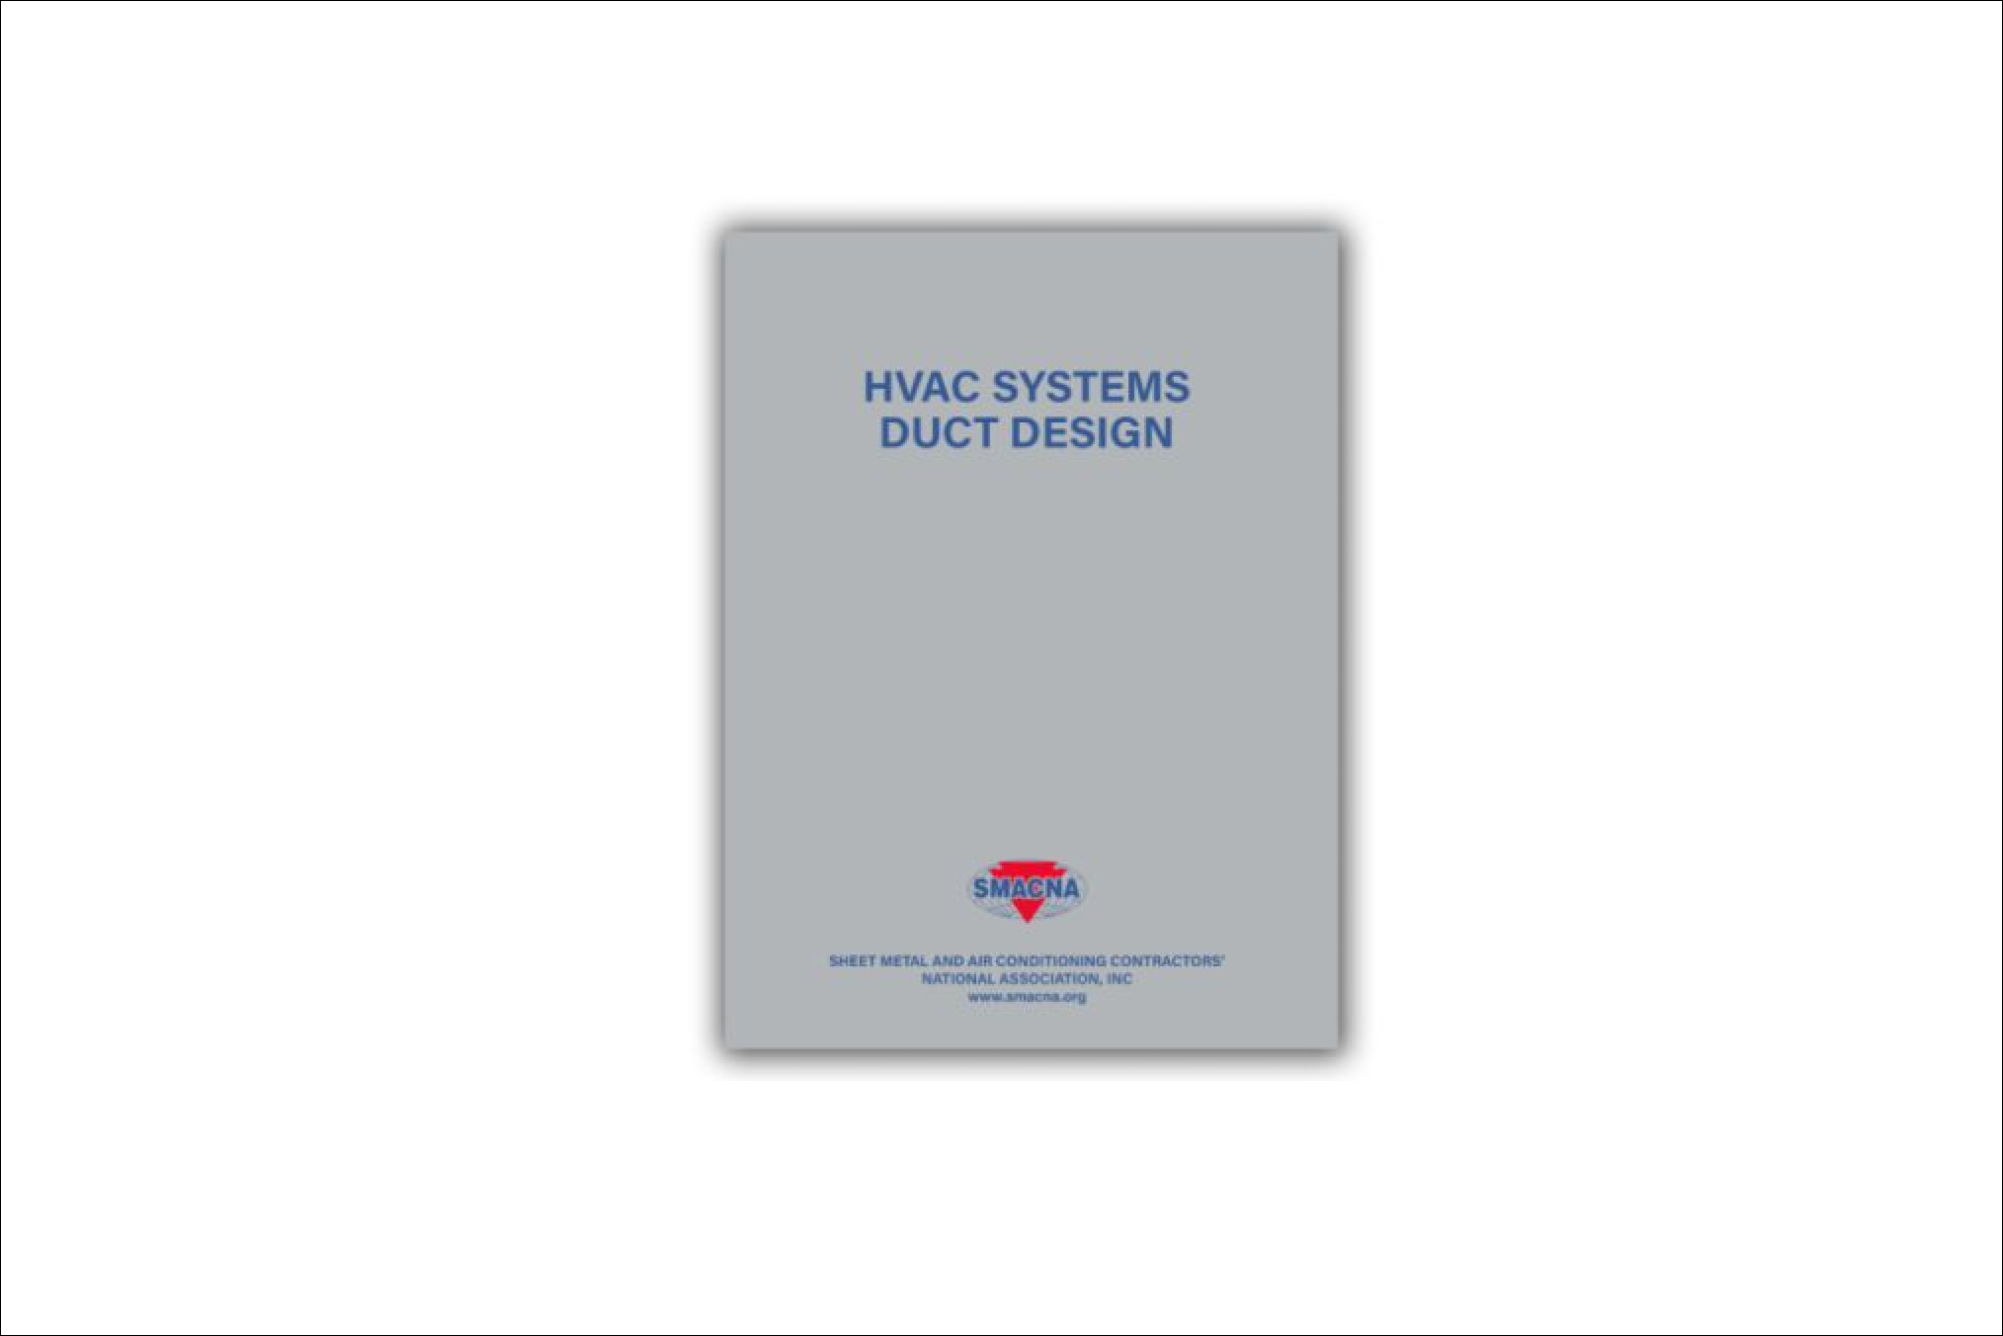 SMACNA Issues Fifth Edition Of Its HVAC Systems Duct Design Manual